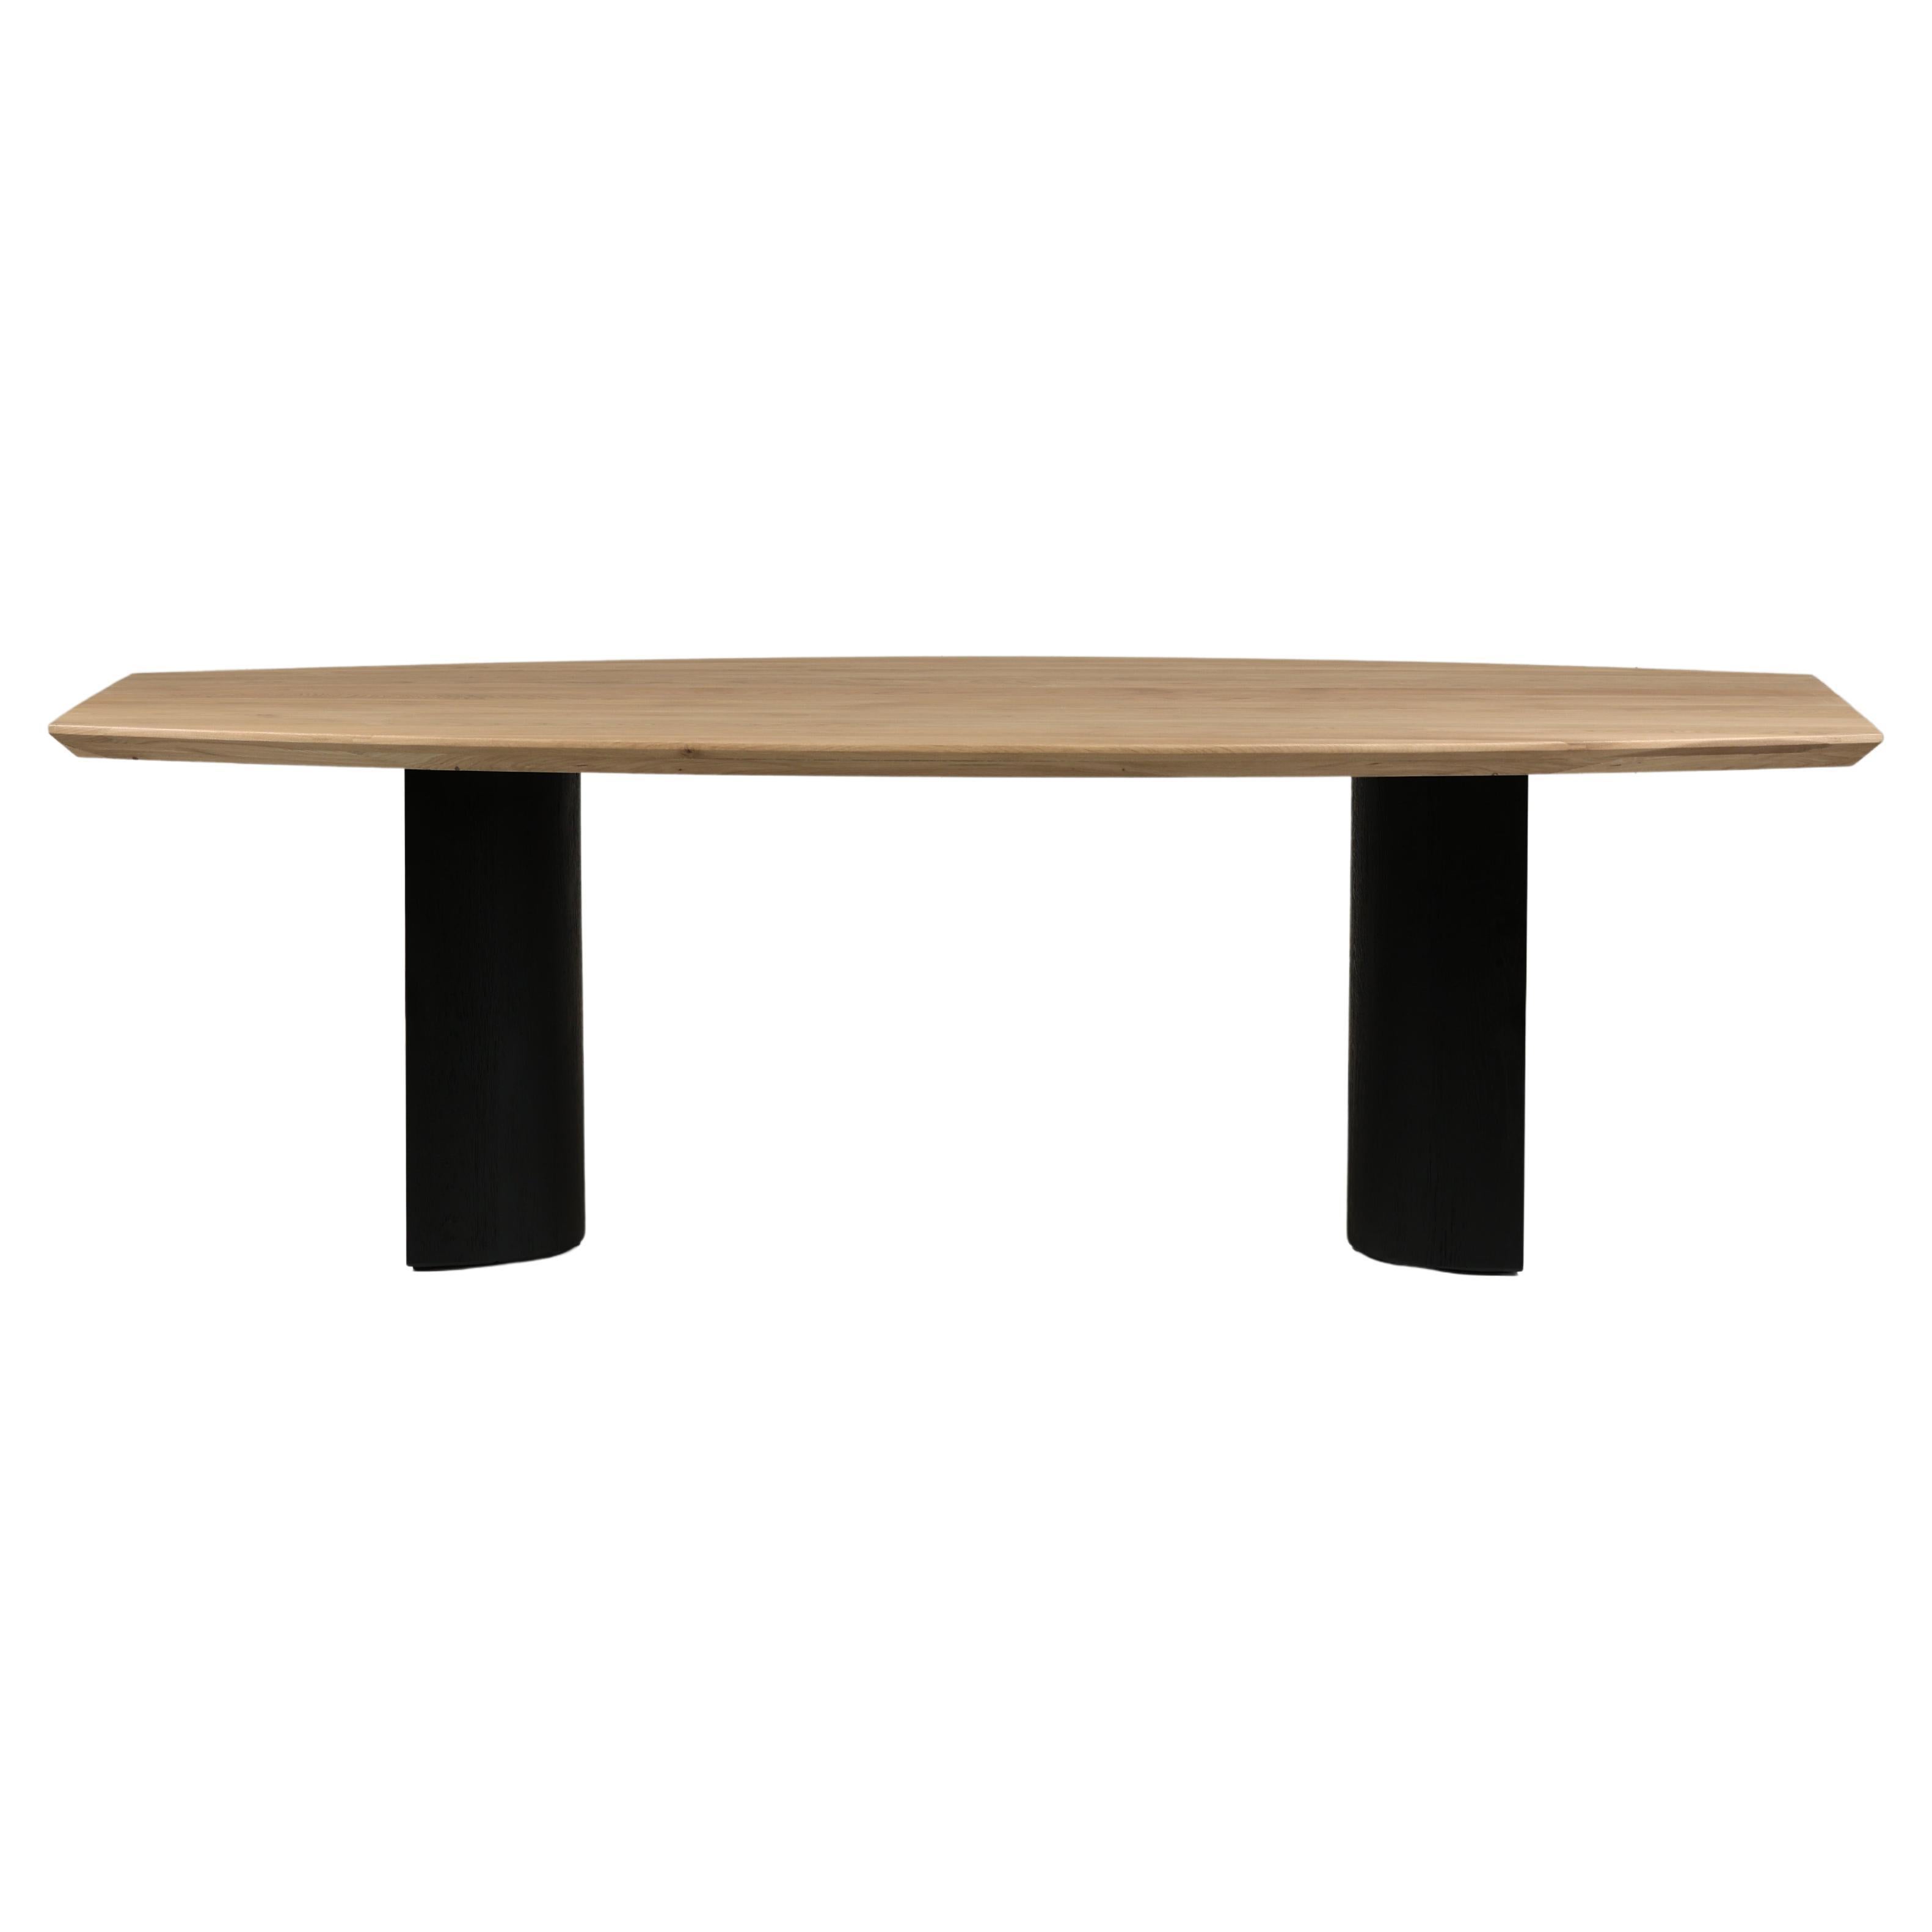 Wyda Conference Table from The Oak Saga collection by Arbore For Sale